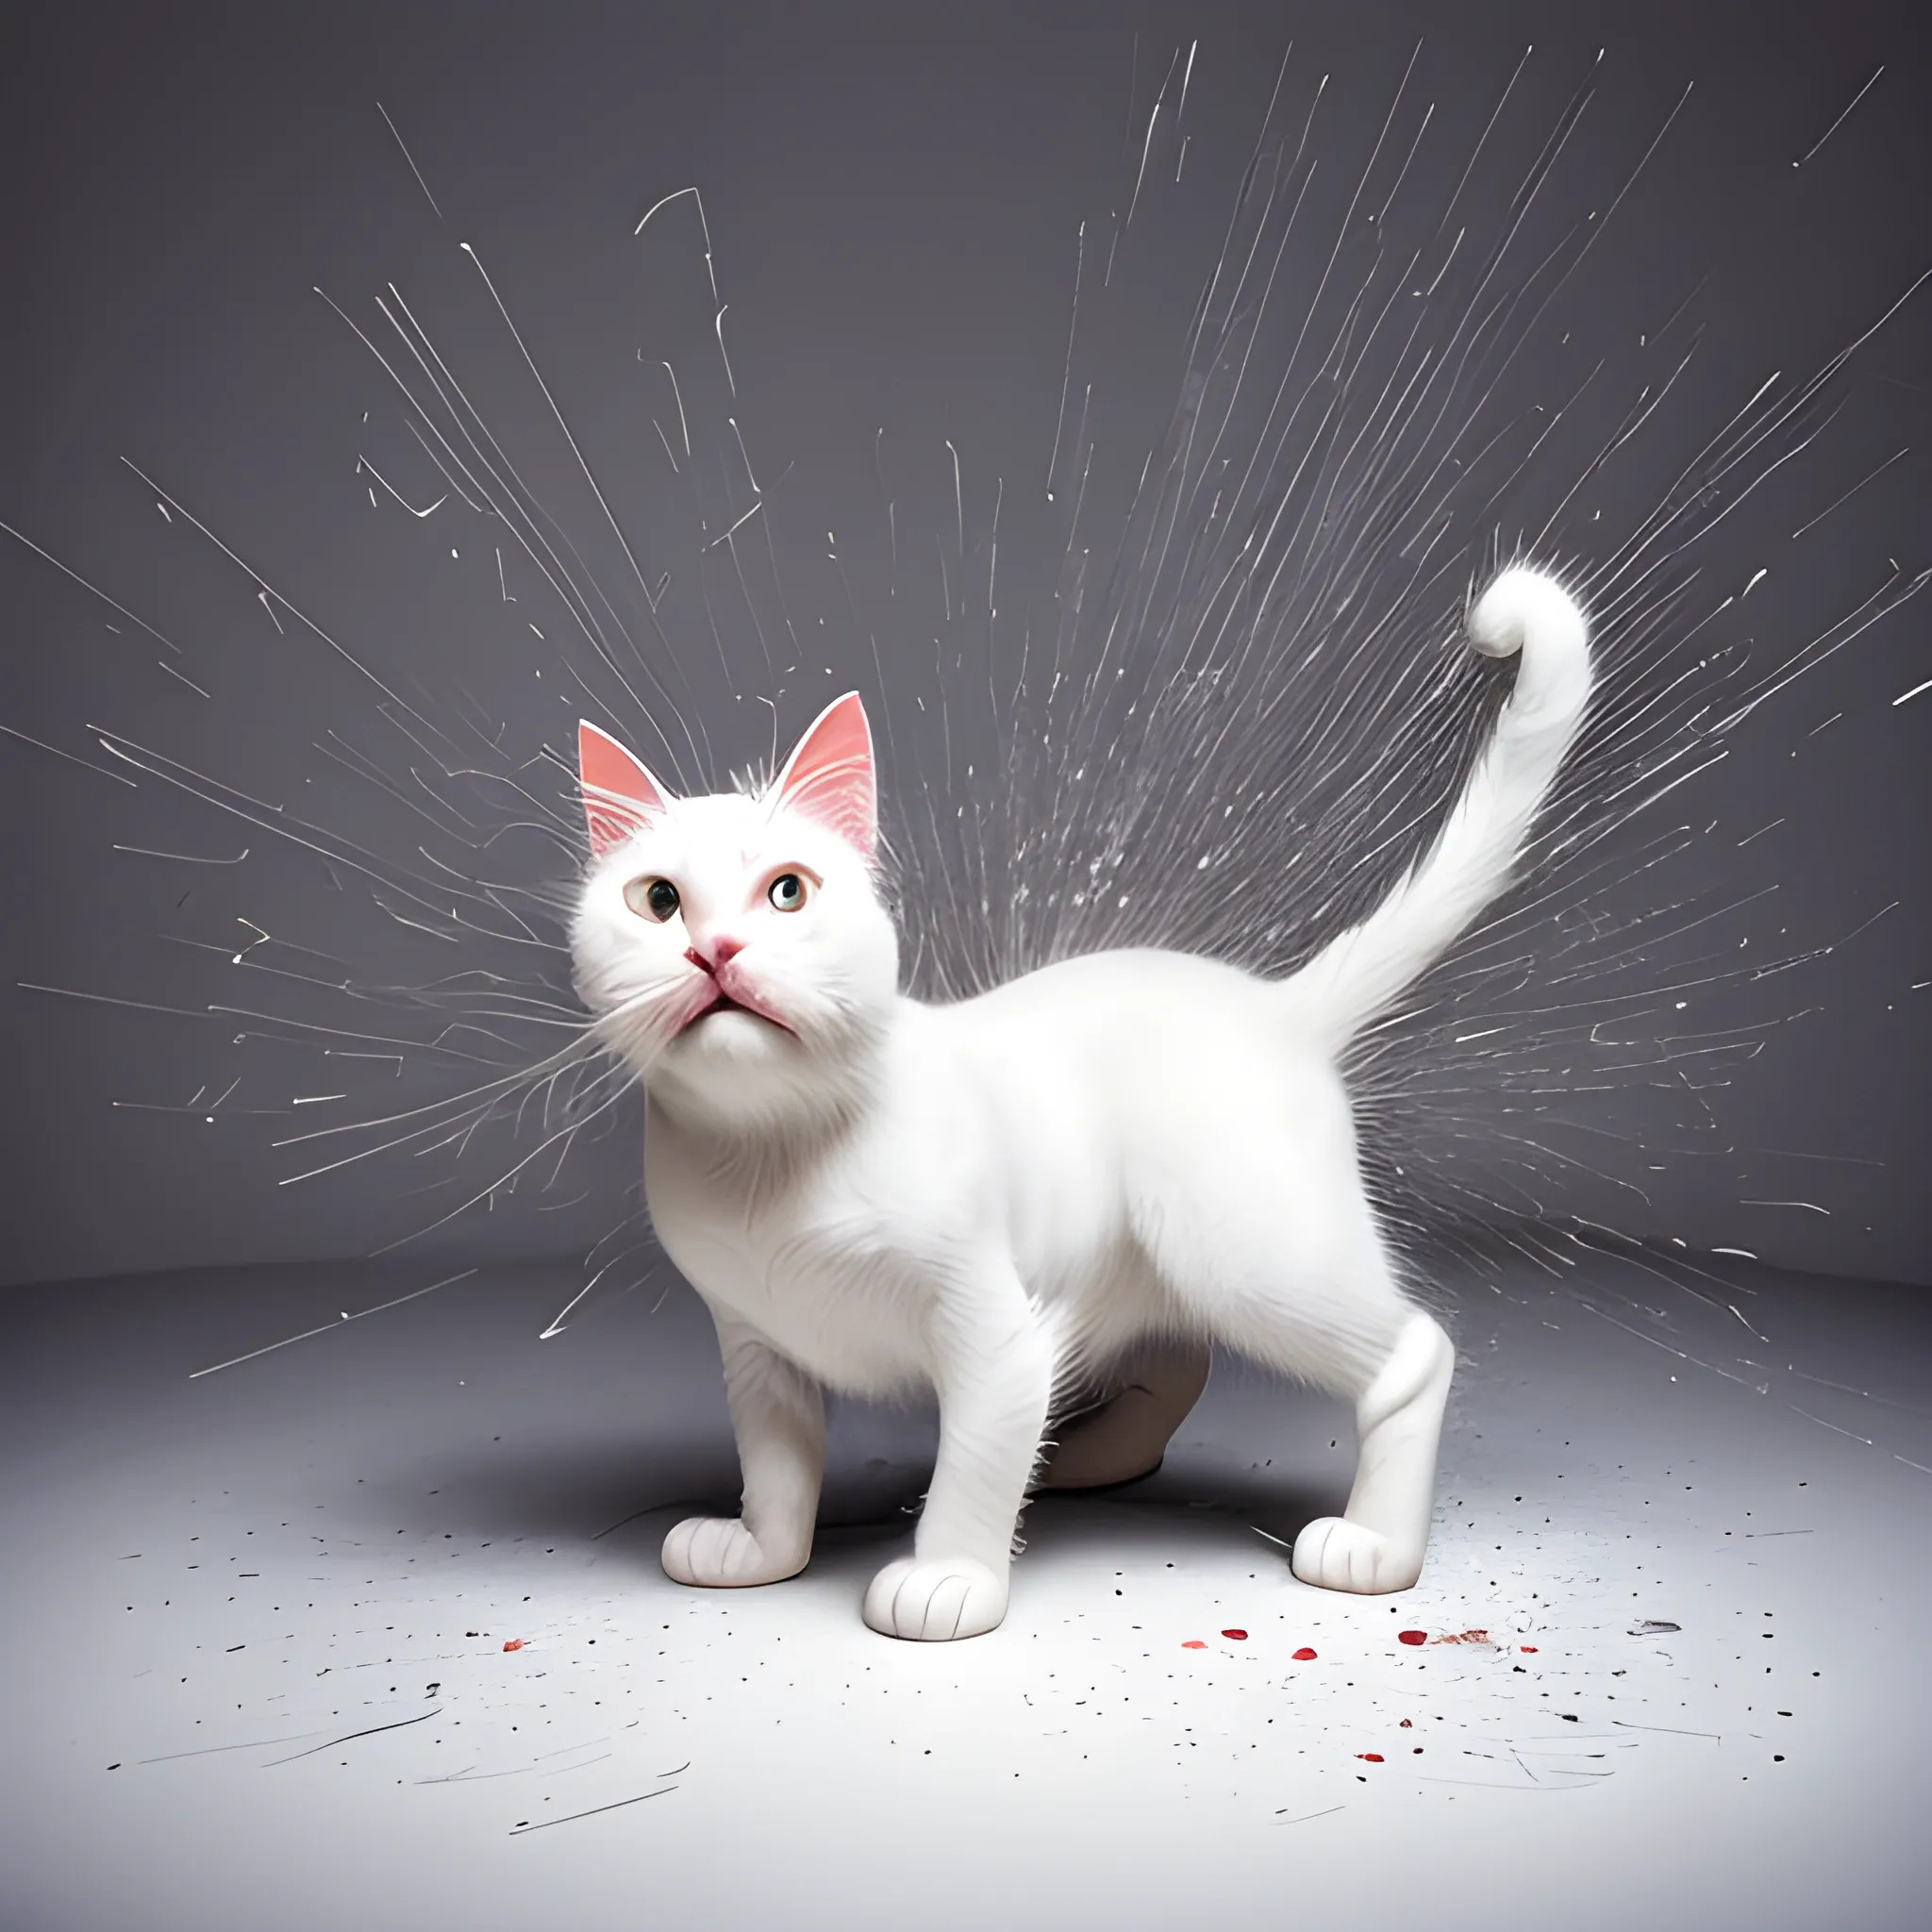 exploded white cat, photography